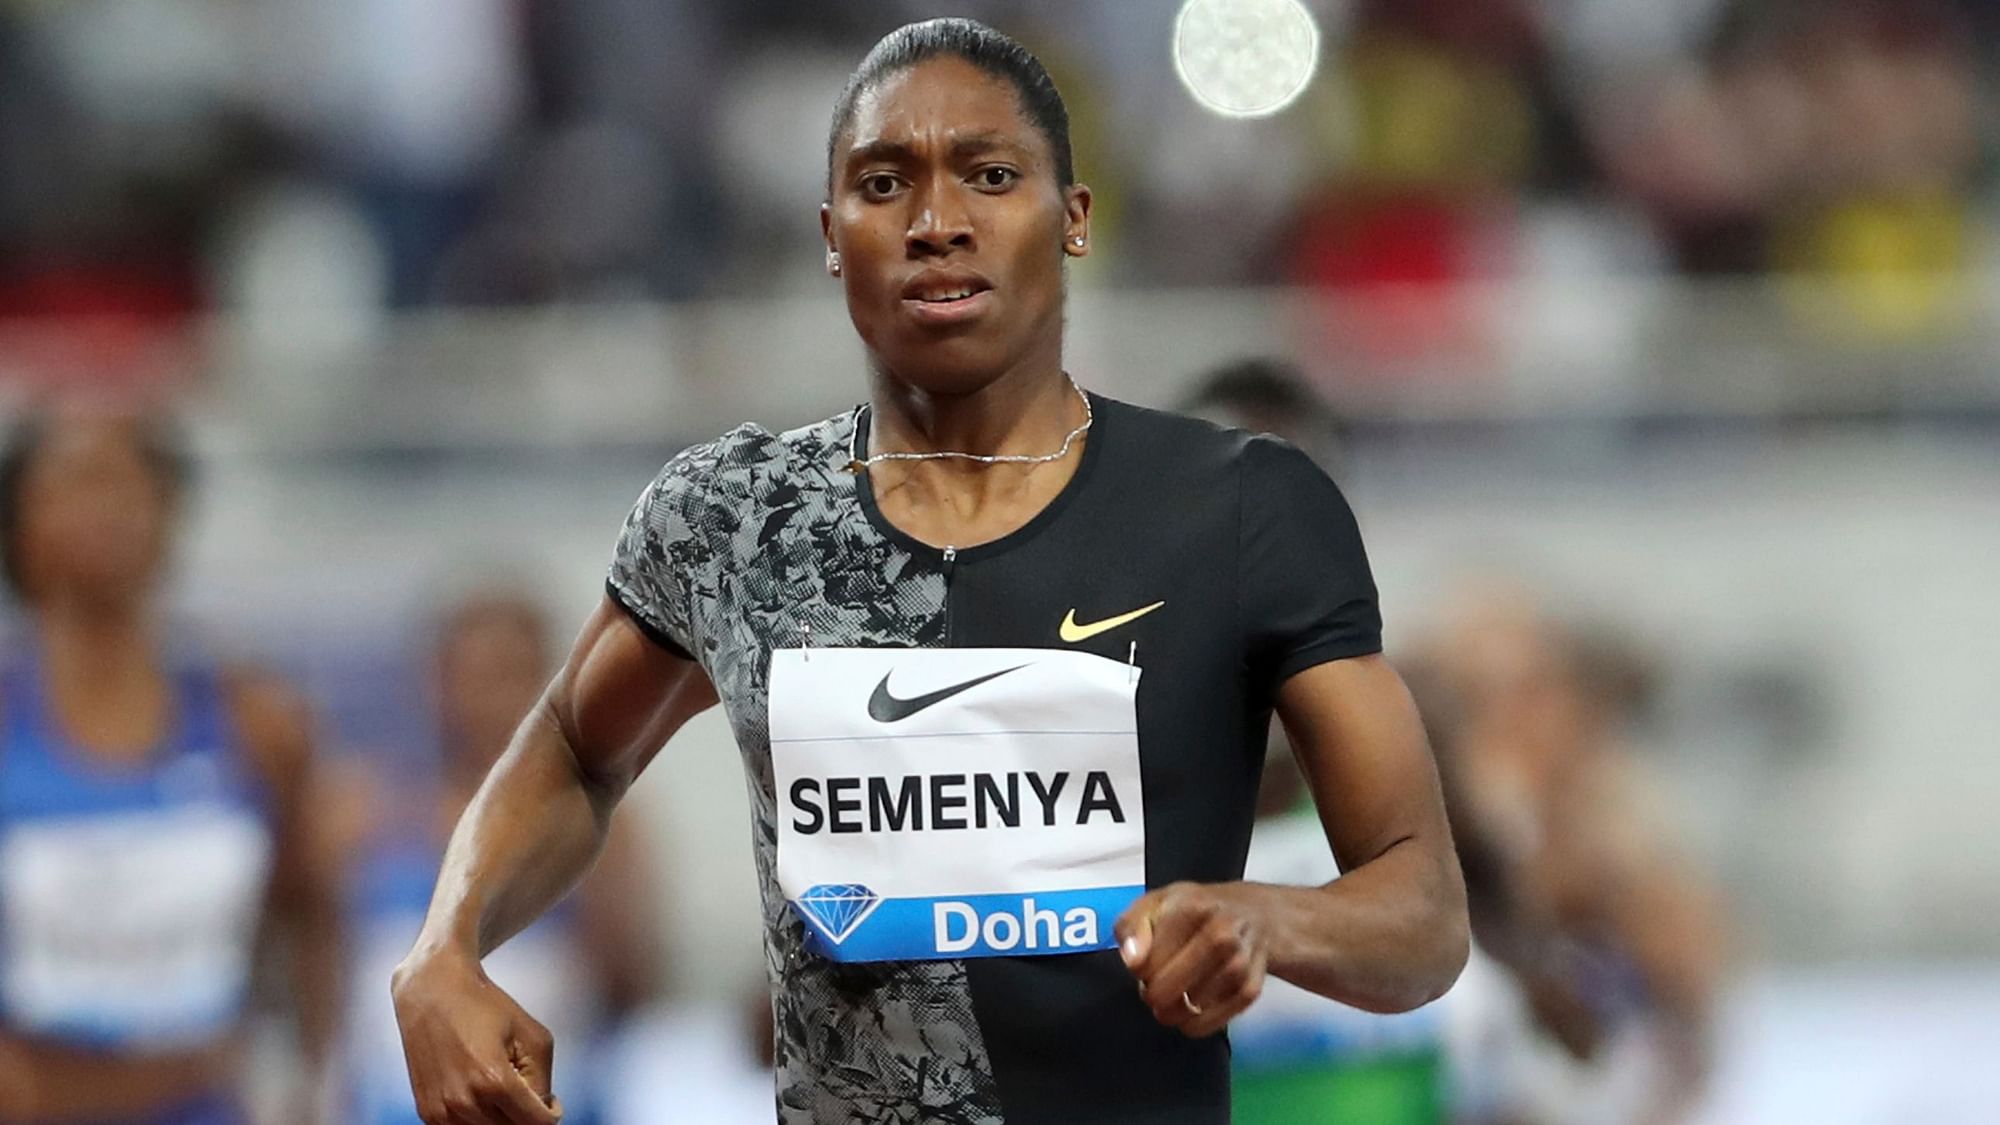 The South African government says there will be an appeal against the Caster Semenya ruling.